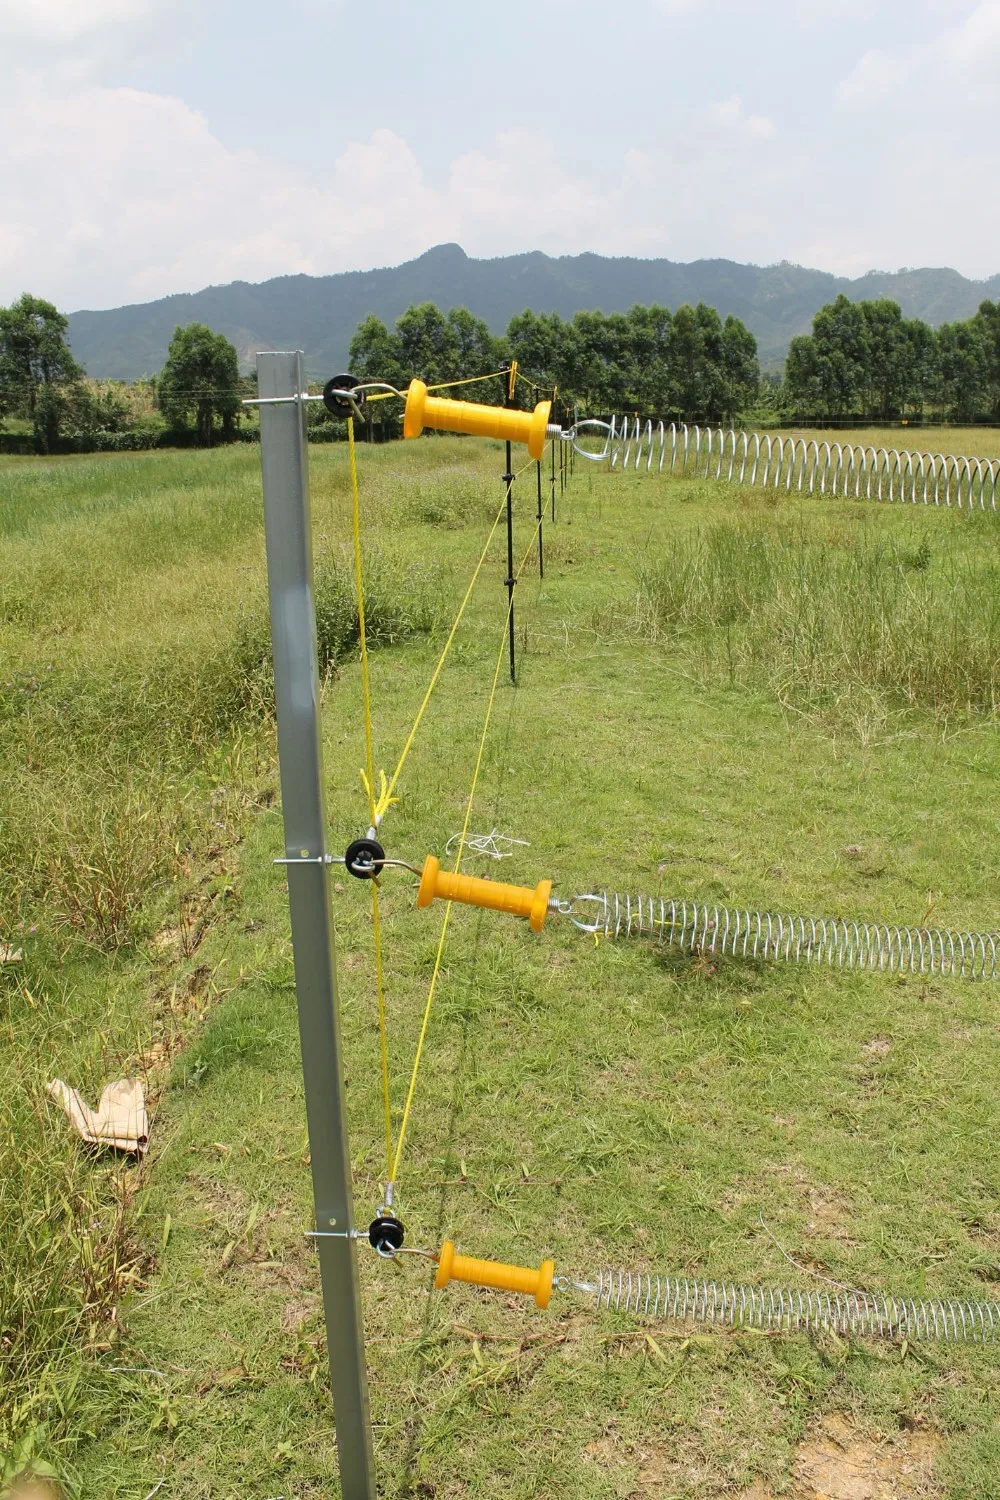 Farm Retractable Plastic Gate Handle For Electric Fence Gate Made In China  - Buy Plastic Gate Handle,Electric Fence Gate Handle,Made In China  Retractable Plastic Gate Handle Product on Alibaba.com